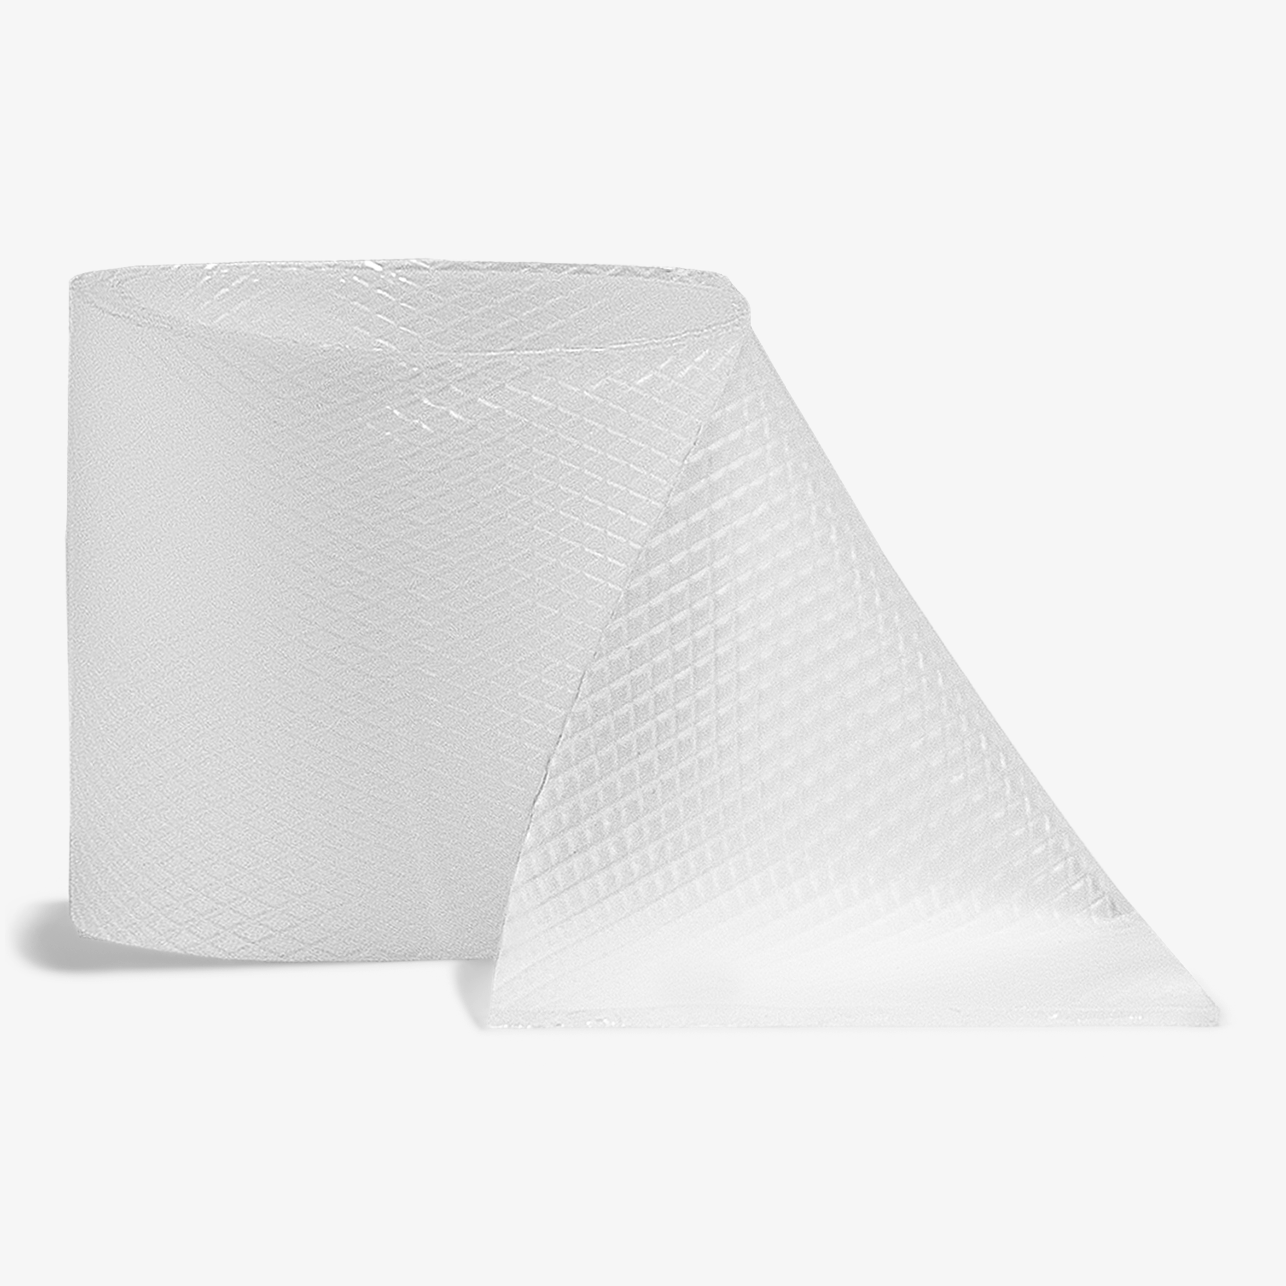 Advanced Medical-Grade Silicone 2" x 18" Roll close up | clear